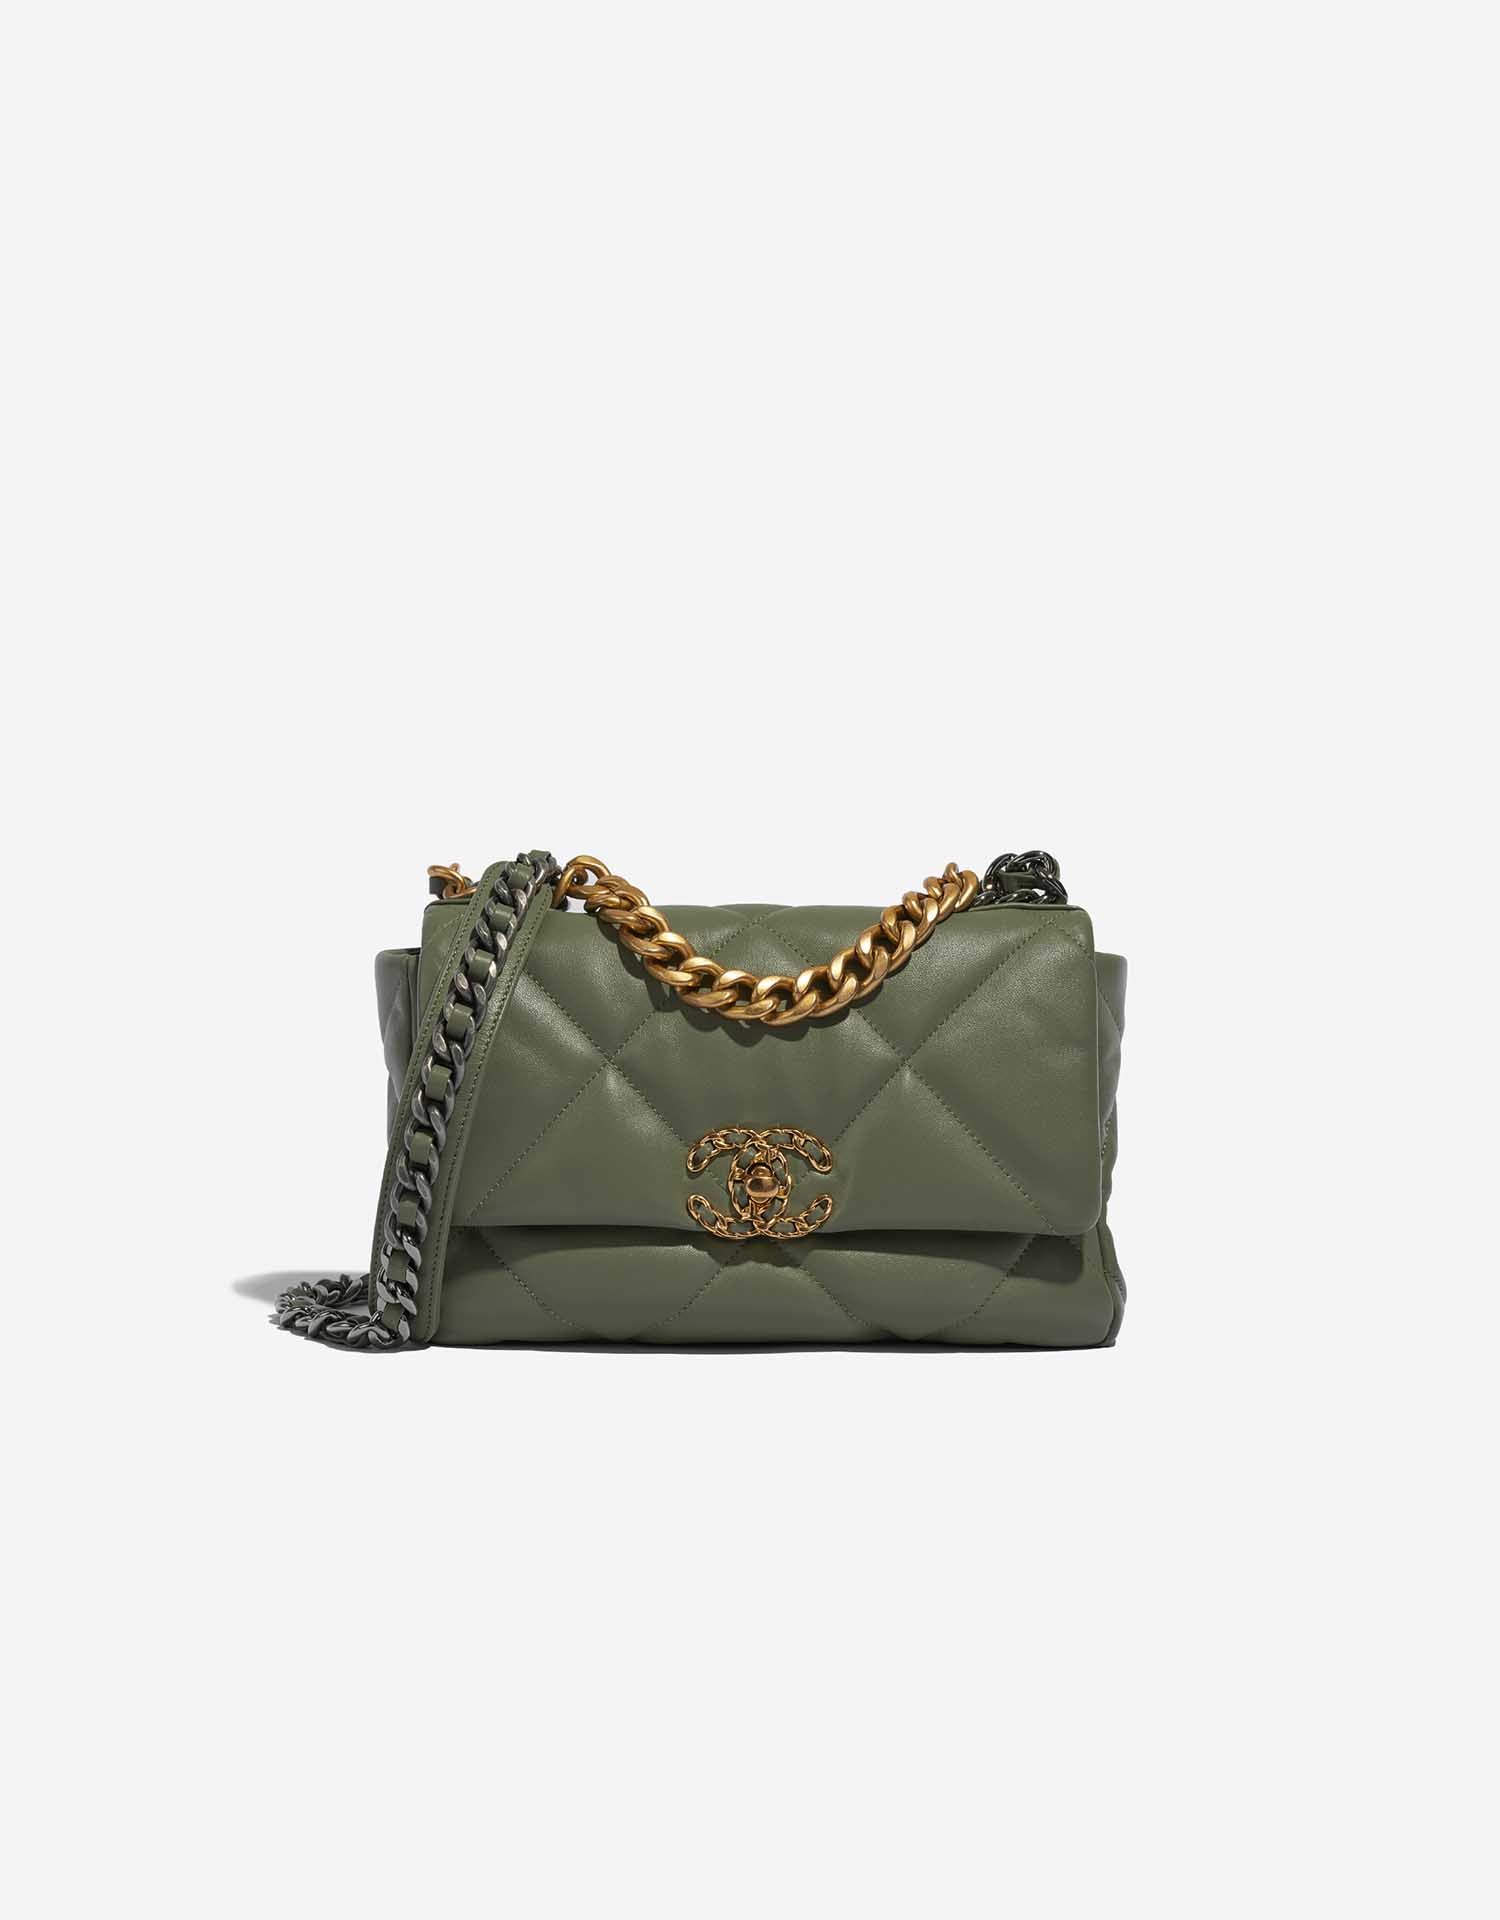 CHANEL Lambskin Quilted Medium Chanel 19 Flap Green 1130026